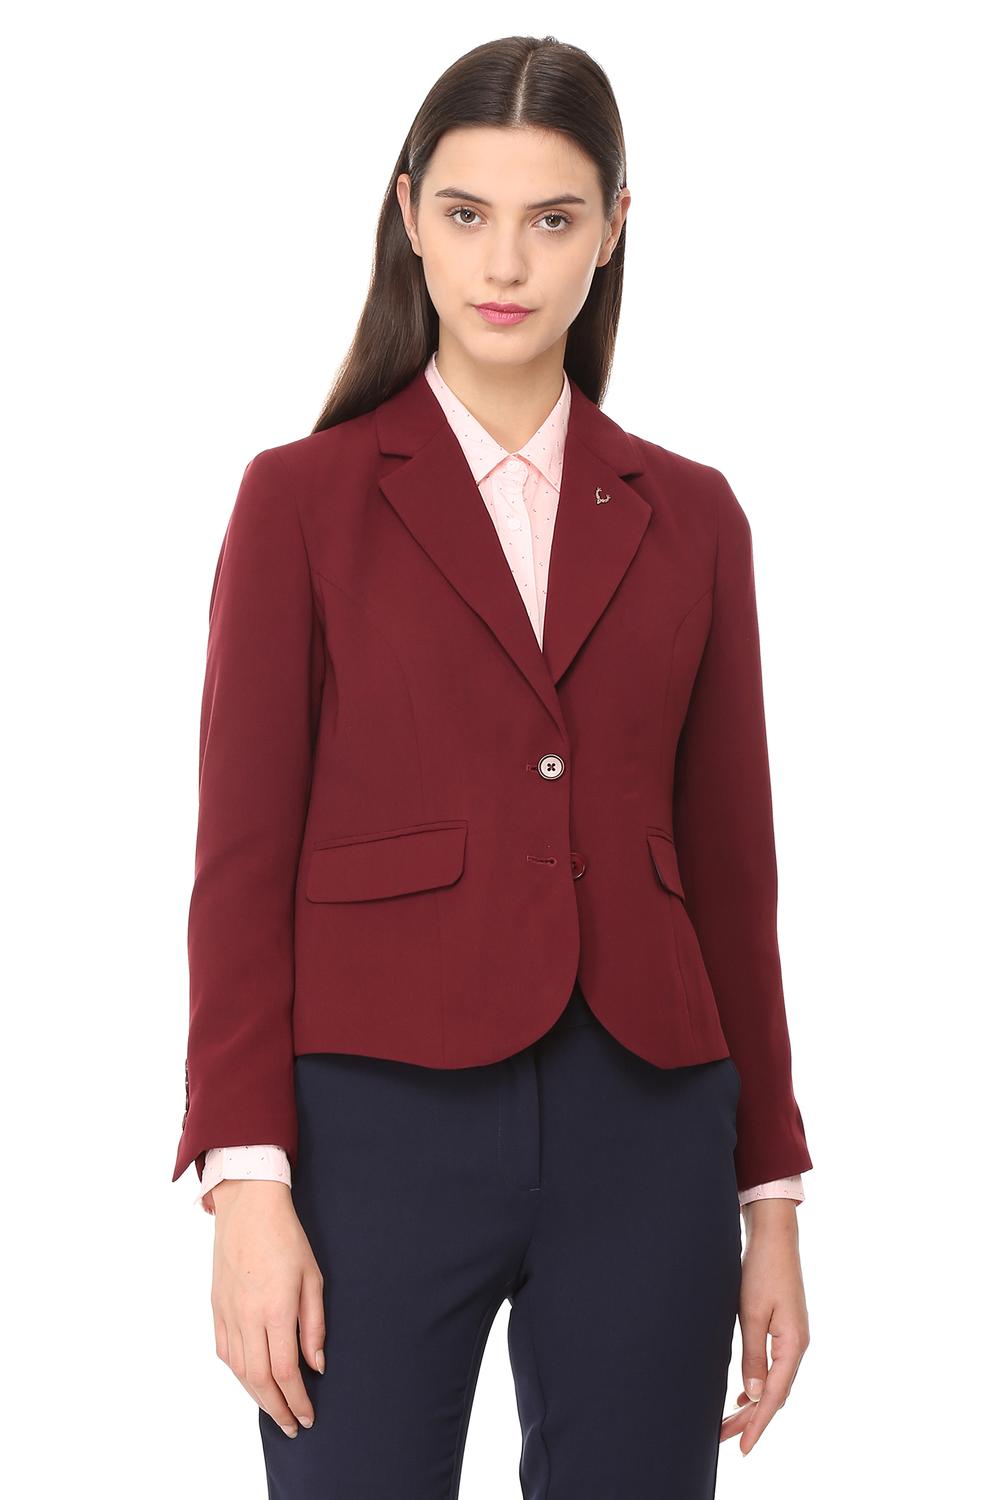 Finding a Great Burgundy Blazer For Less